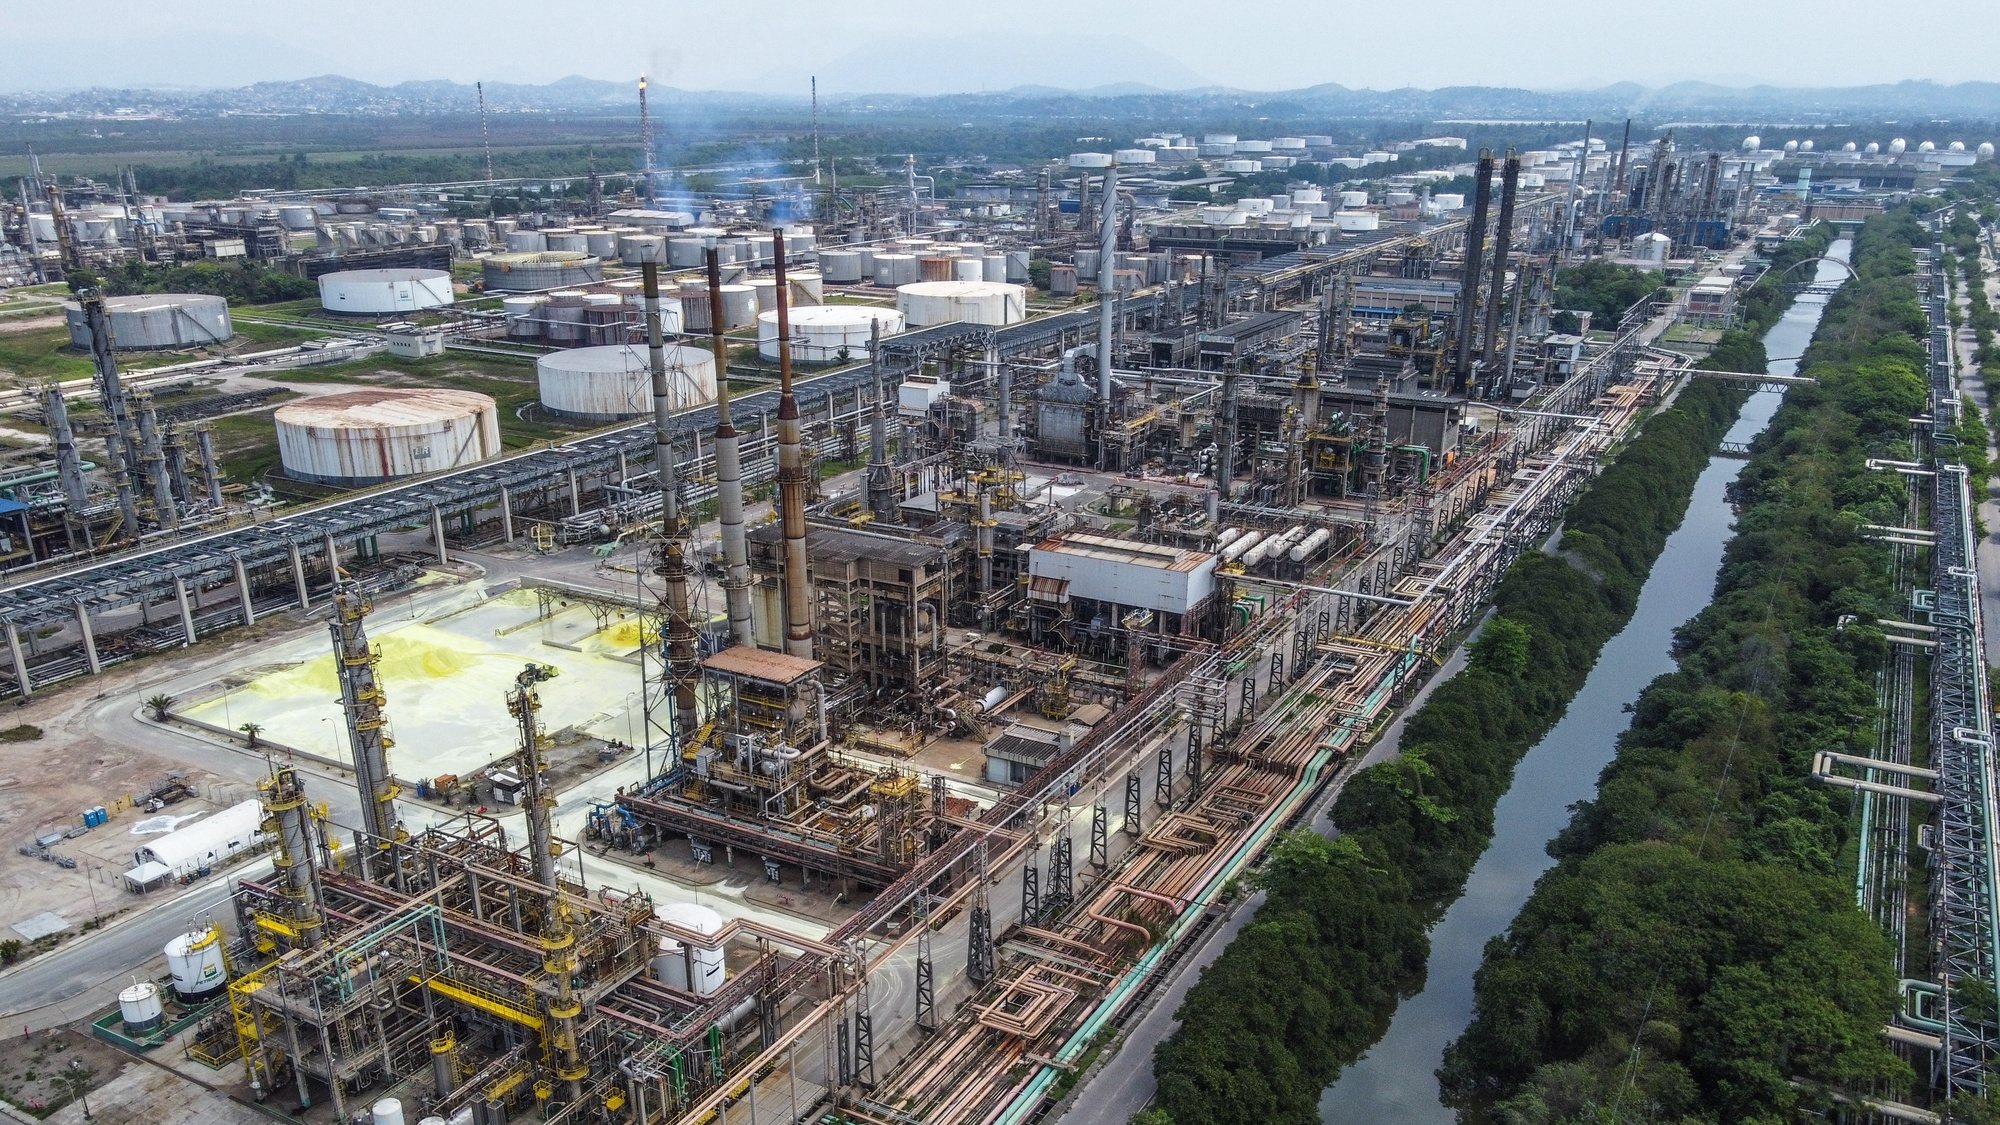 epa09496218 An aerial picture taken with a drone showing the Petrobras refinery in Duque de Caxias (REDUC), in Rio de Janeiro, Brazil, 29 September 2021. The Petrobras company confirmed on 29 September that it readjusted diesel prices at refineries by 8.89 percent with immediate effect.  EPA/ANDRE COELHO